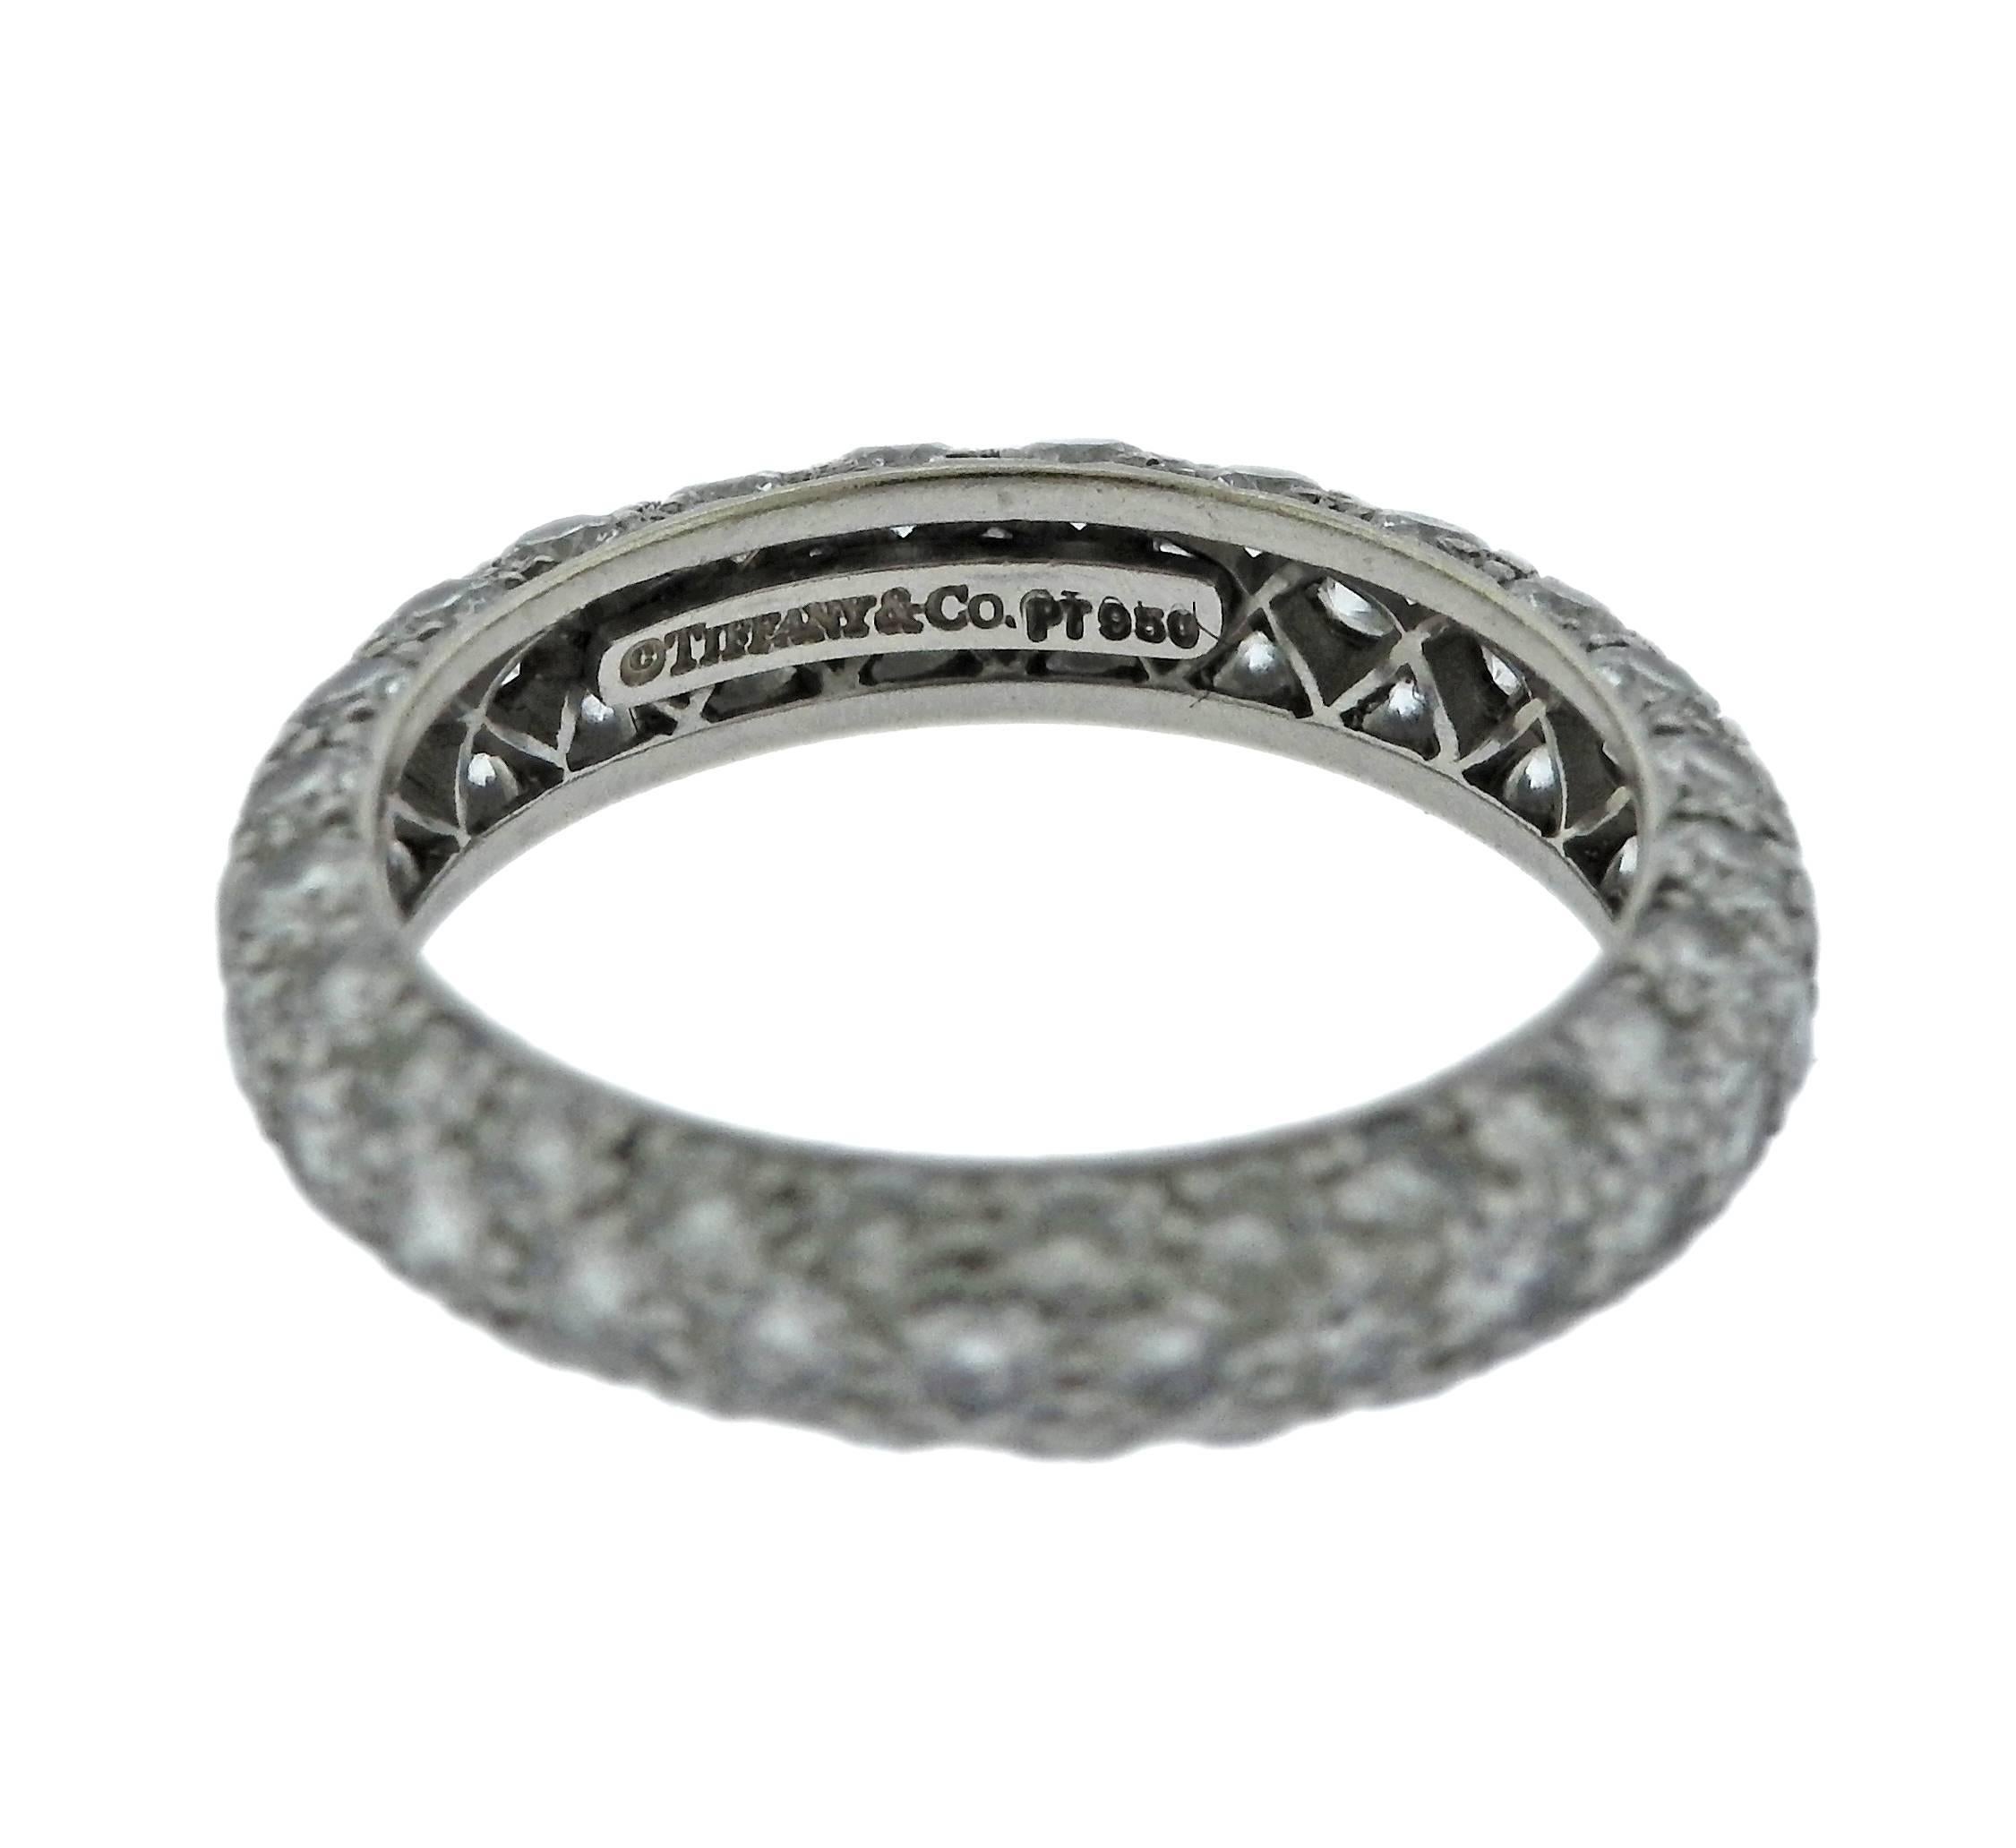 Platinum 1.80ctw G/VS wedding band ring crafted by Tiffany & Co for the Etoile collection. Ring size - 4 1/2, ring is 3.6mm wide and weighs 2.8 grams. Marked Tiffany & Co, pt950.